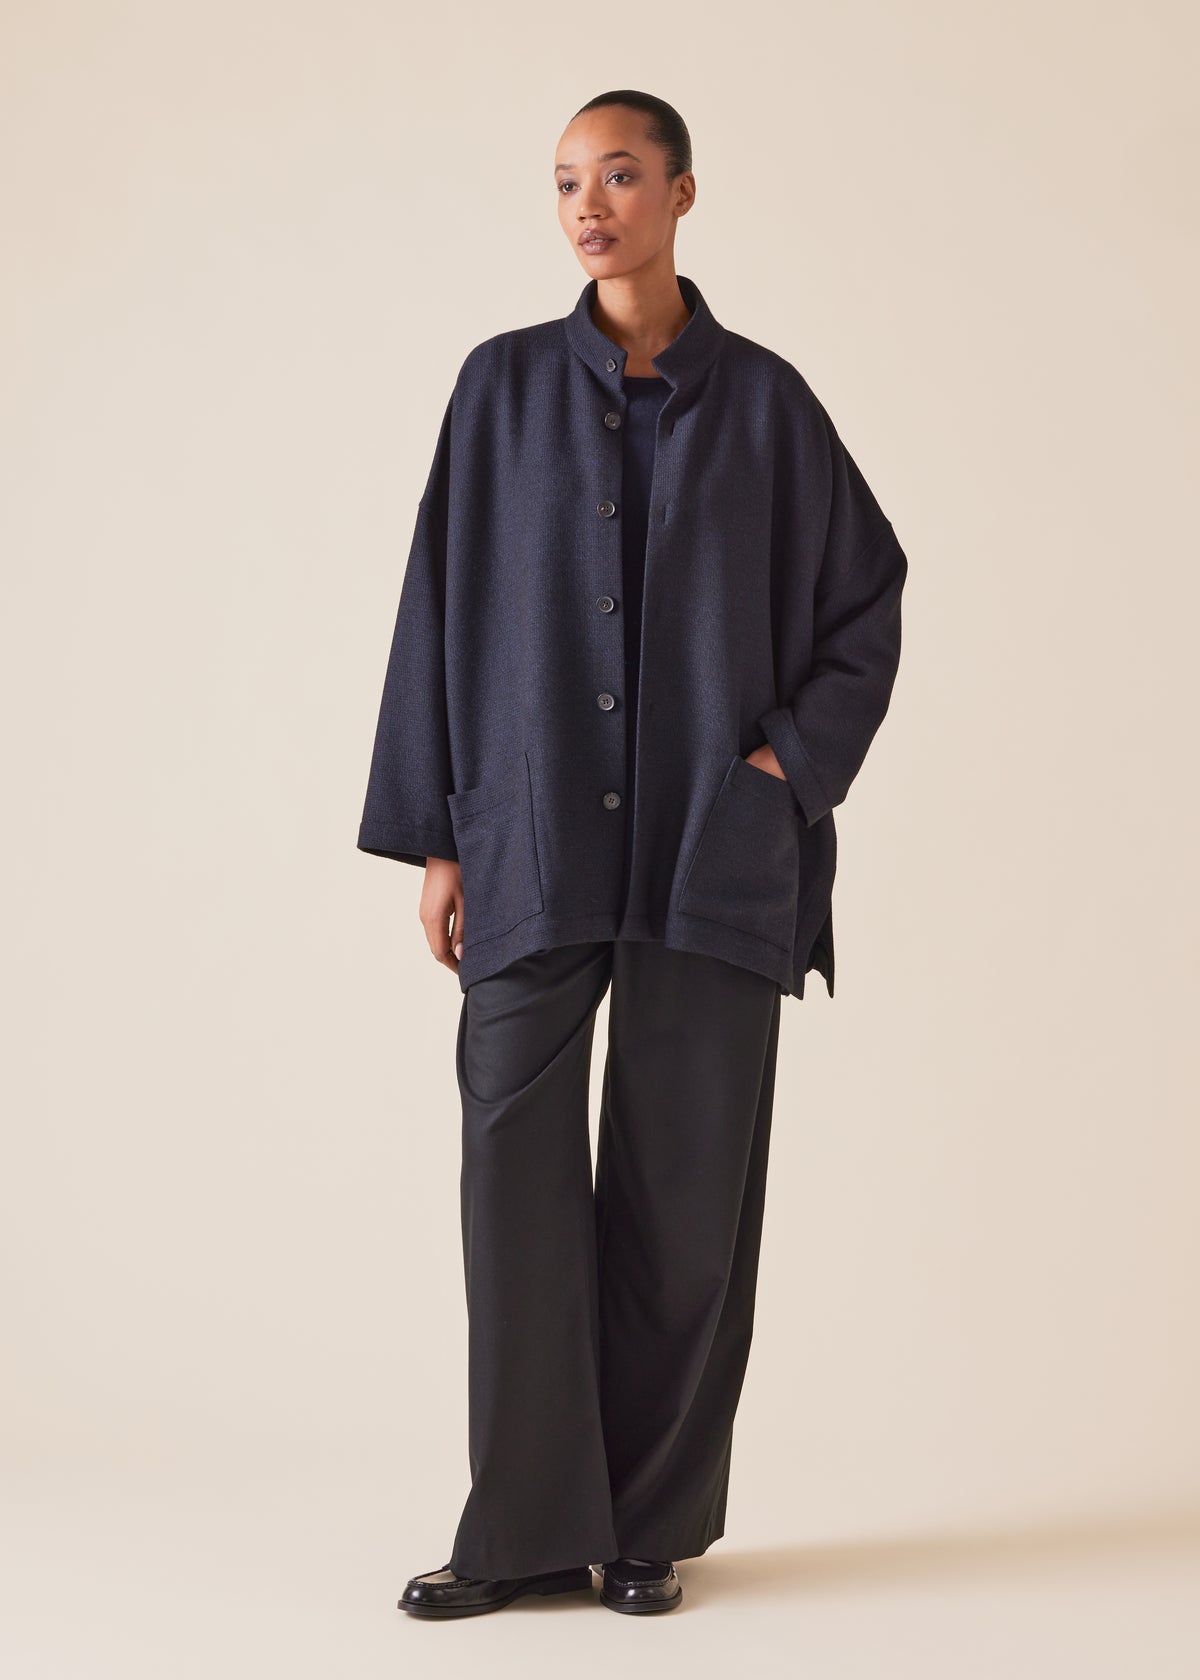 wool cashmere mix wide open stand collar jacket - long